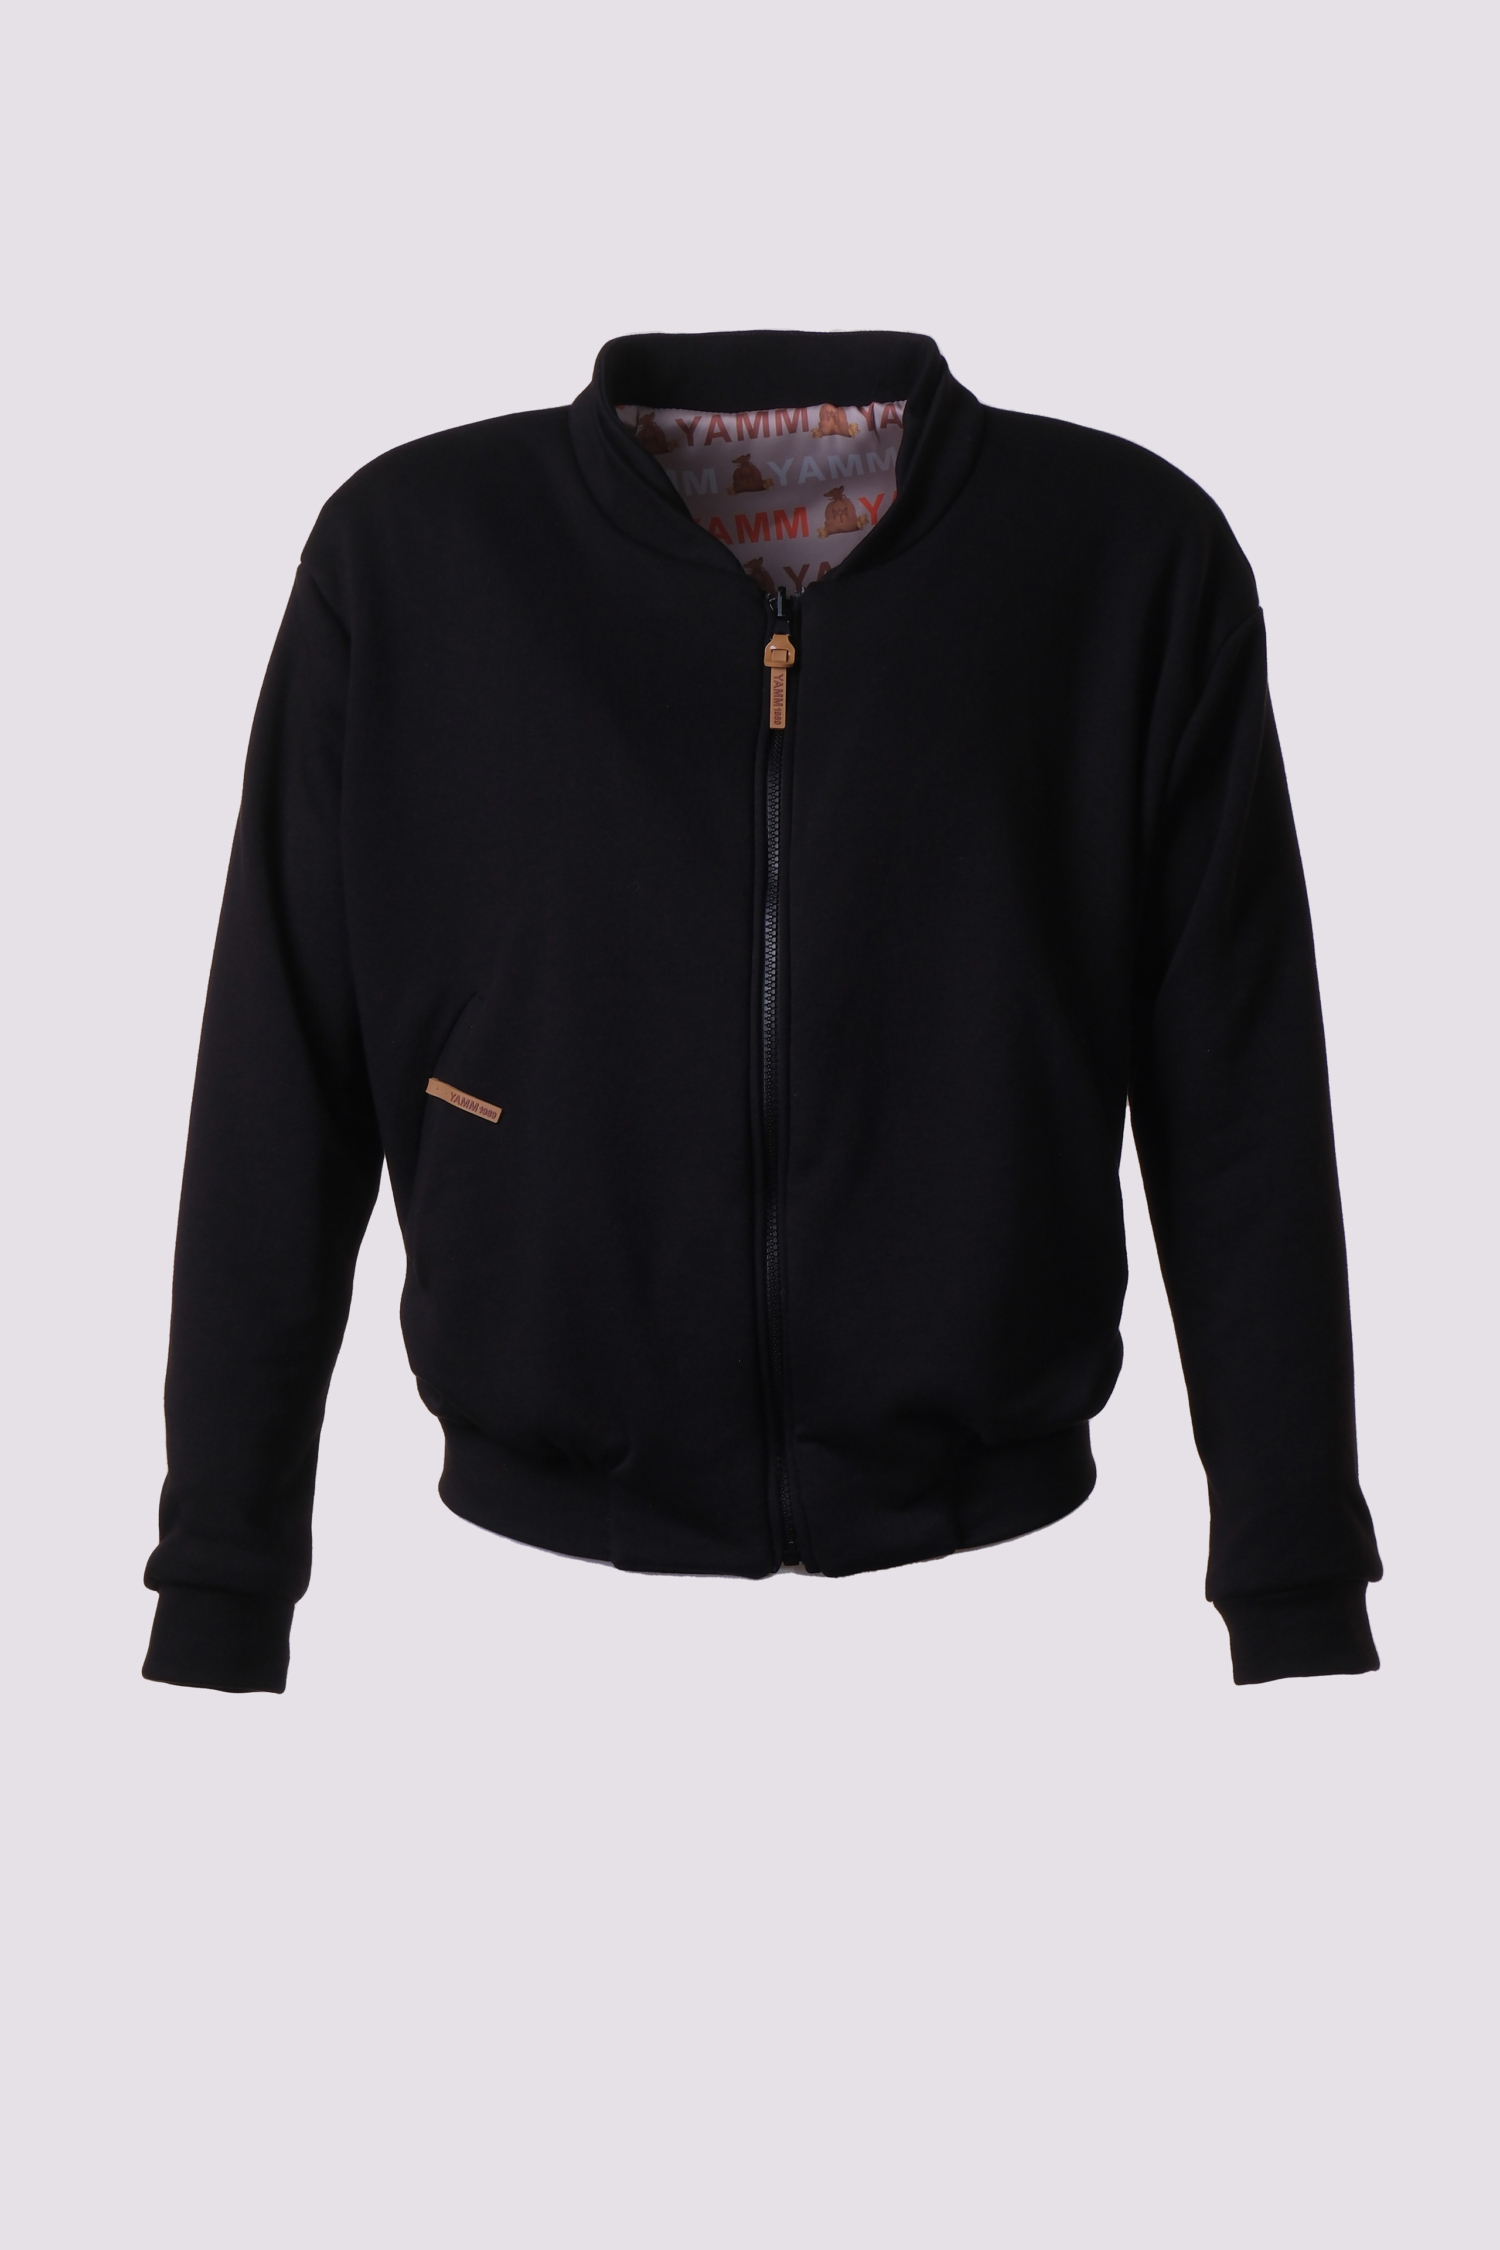 YAMM Black Line Hoodie Two Faces